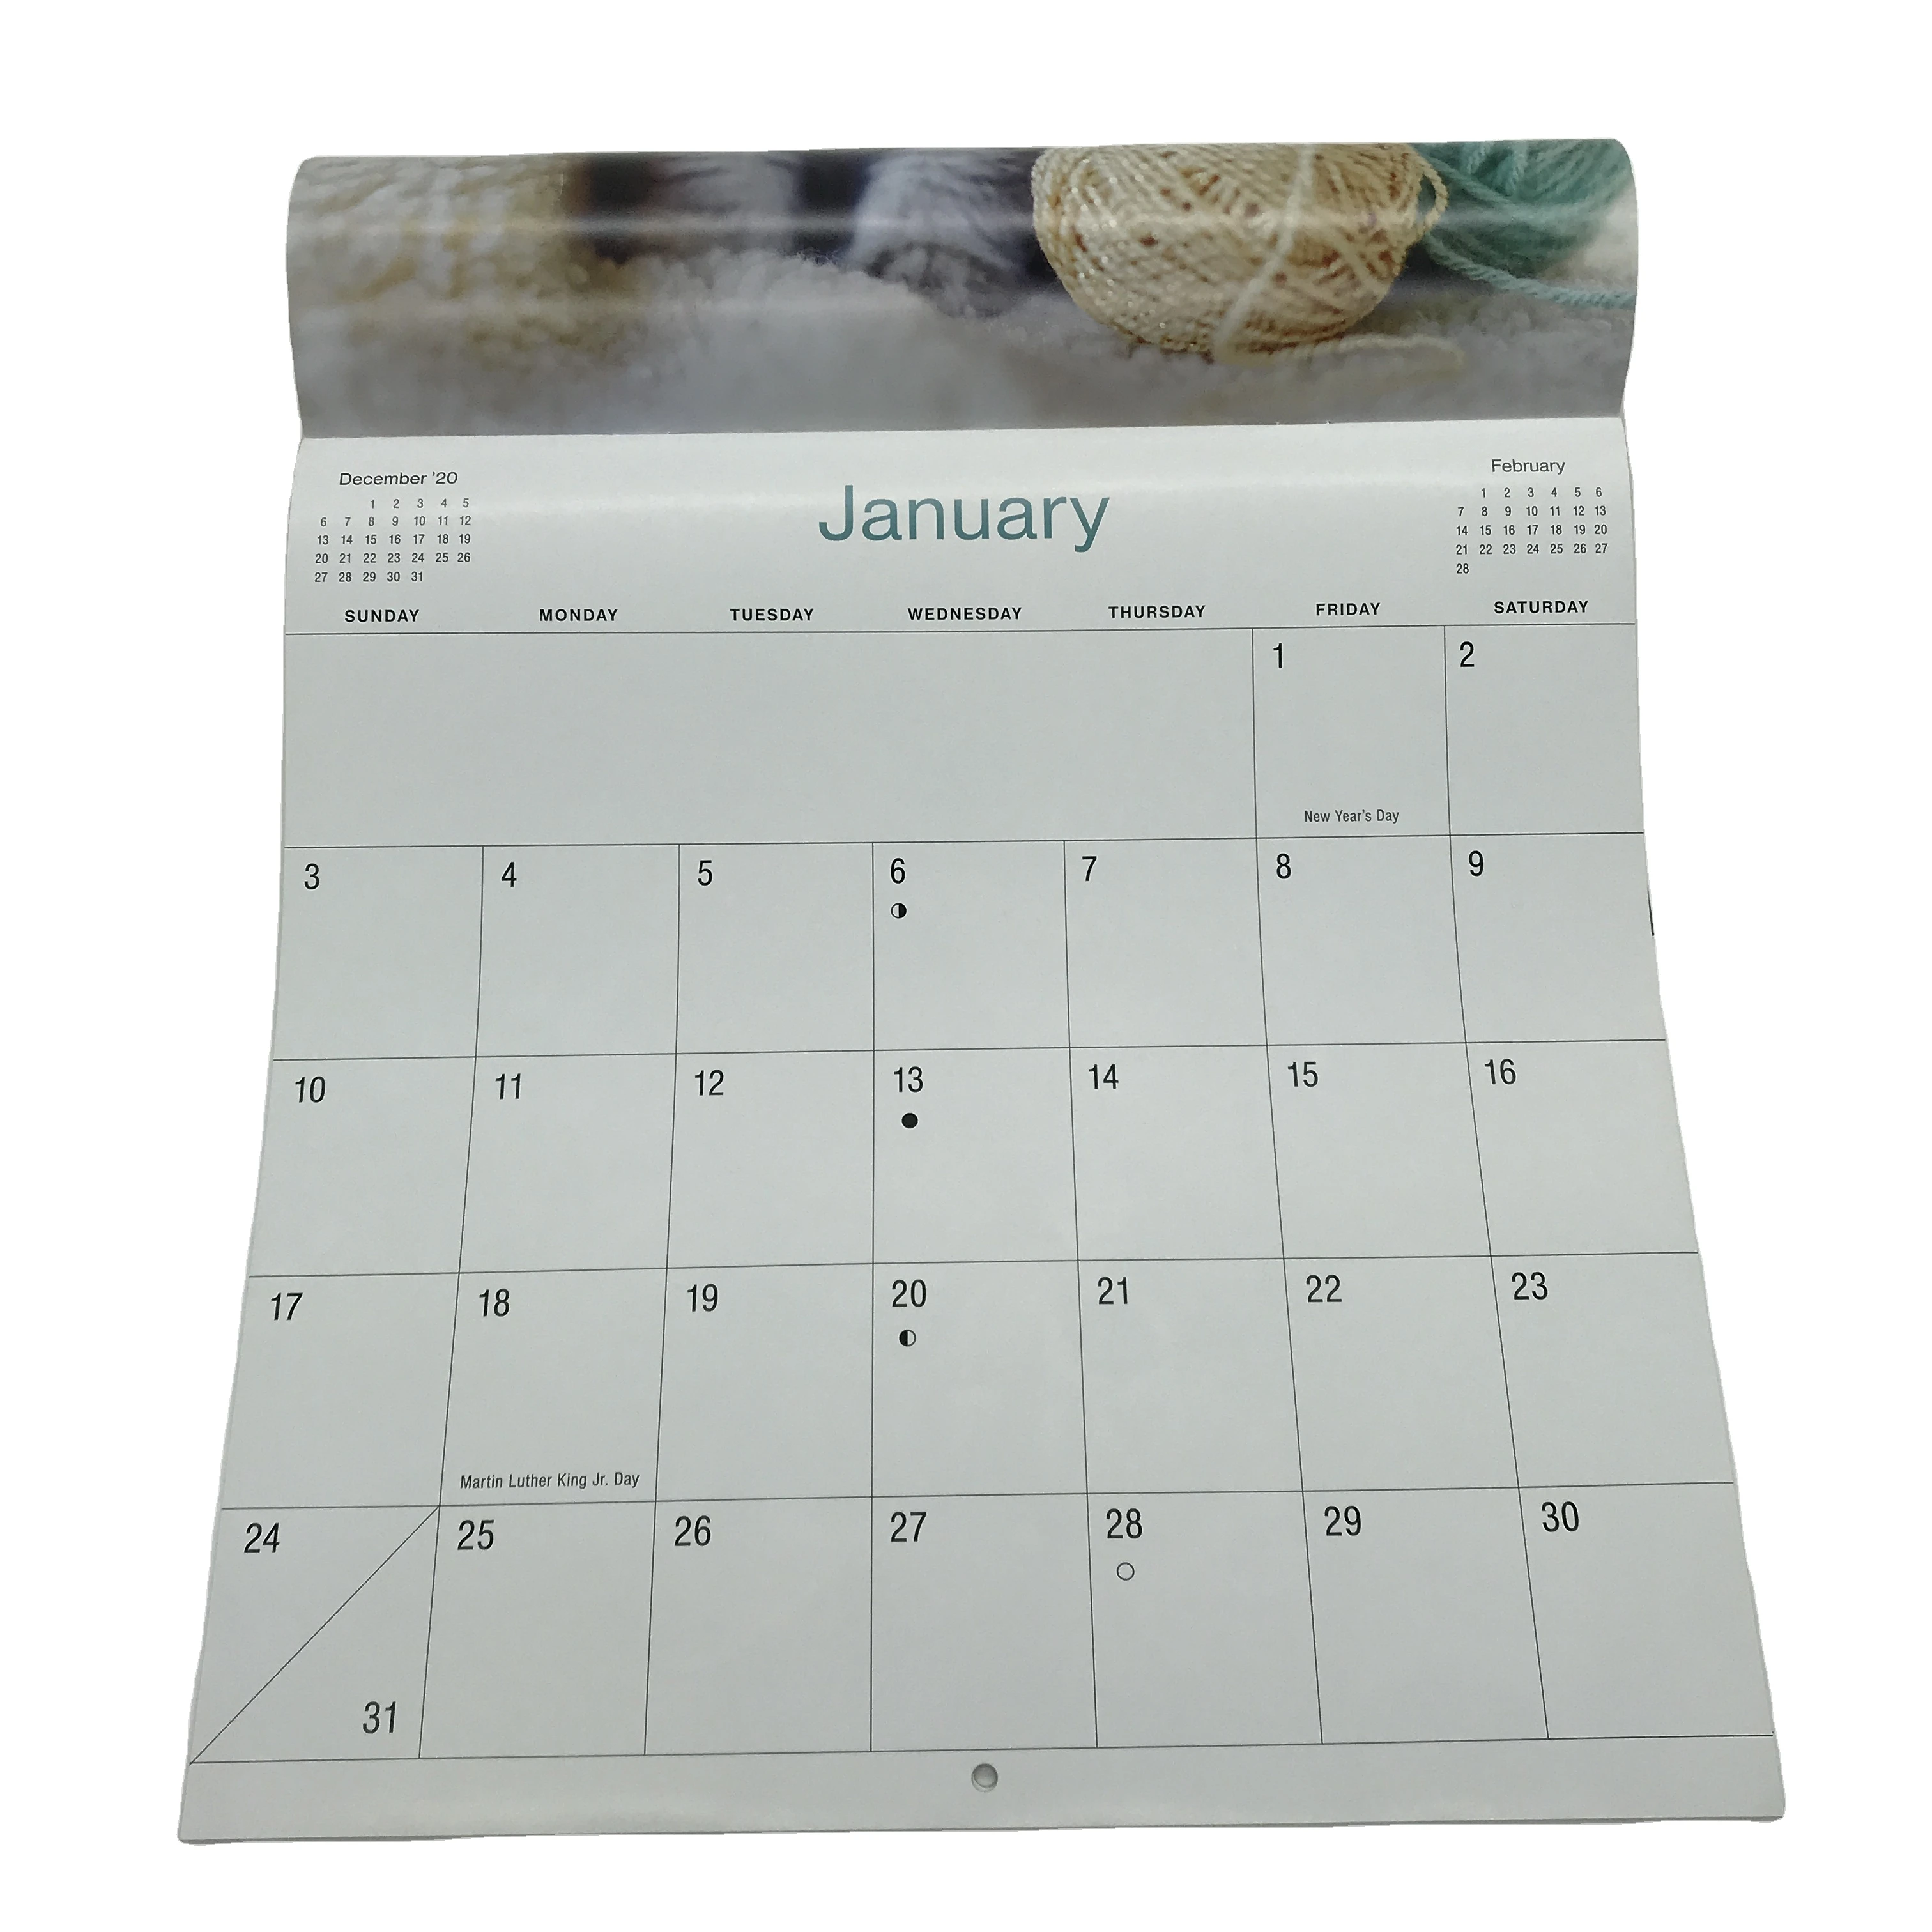 SM-GL011 Wholesale Custom Printing Spiral Wire binding Wall Monthly Calendar